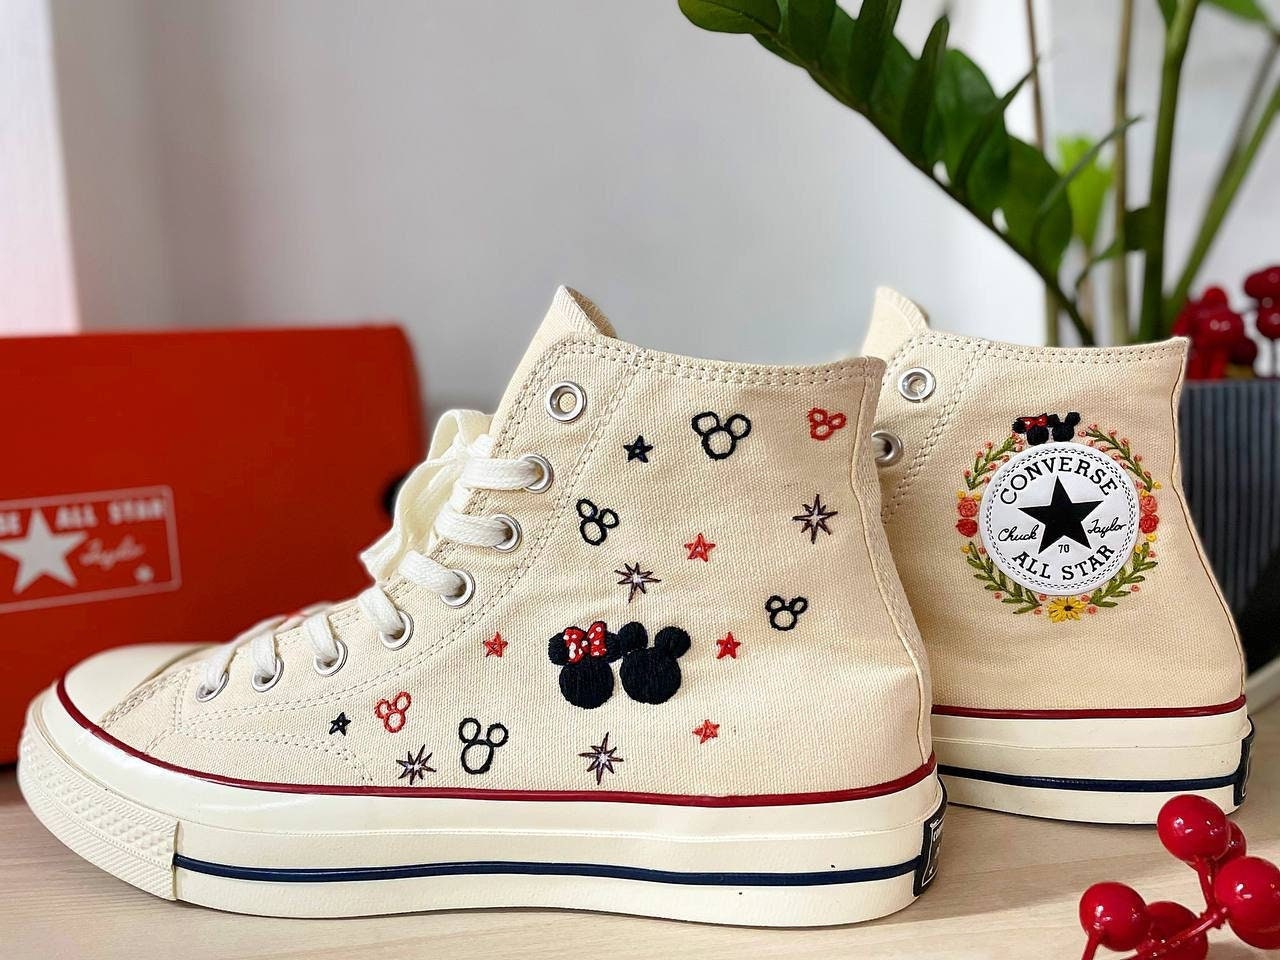 Bowling Telegraph Passerby Mickey Minnie Embroidery Converse Flowers Hand Embroidery - Etsy